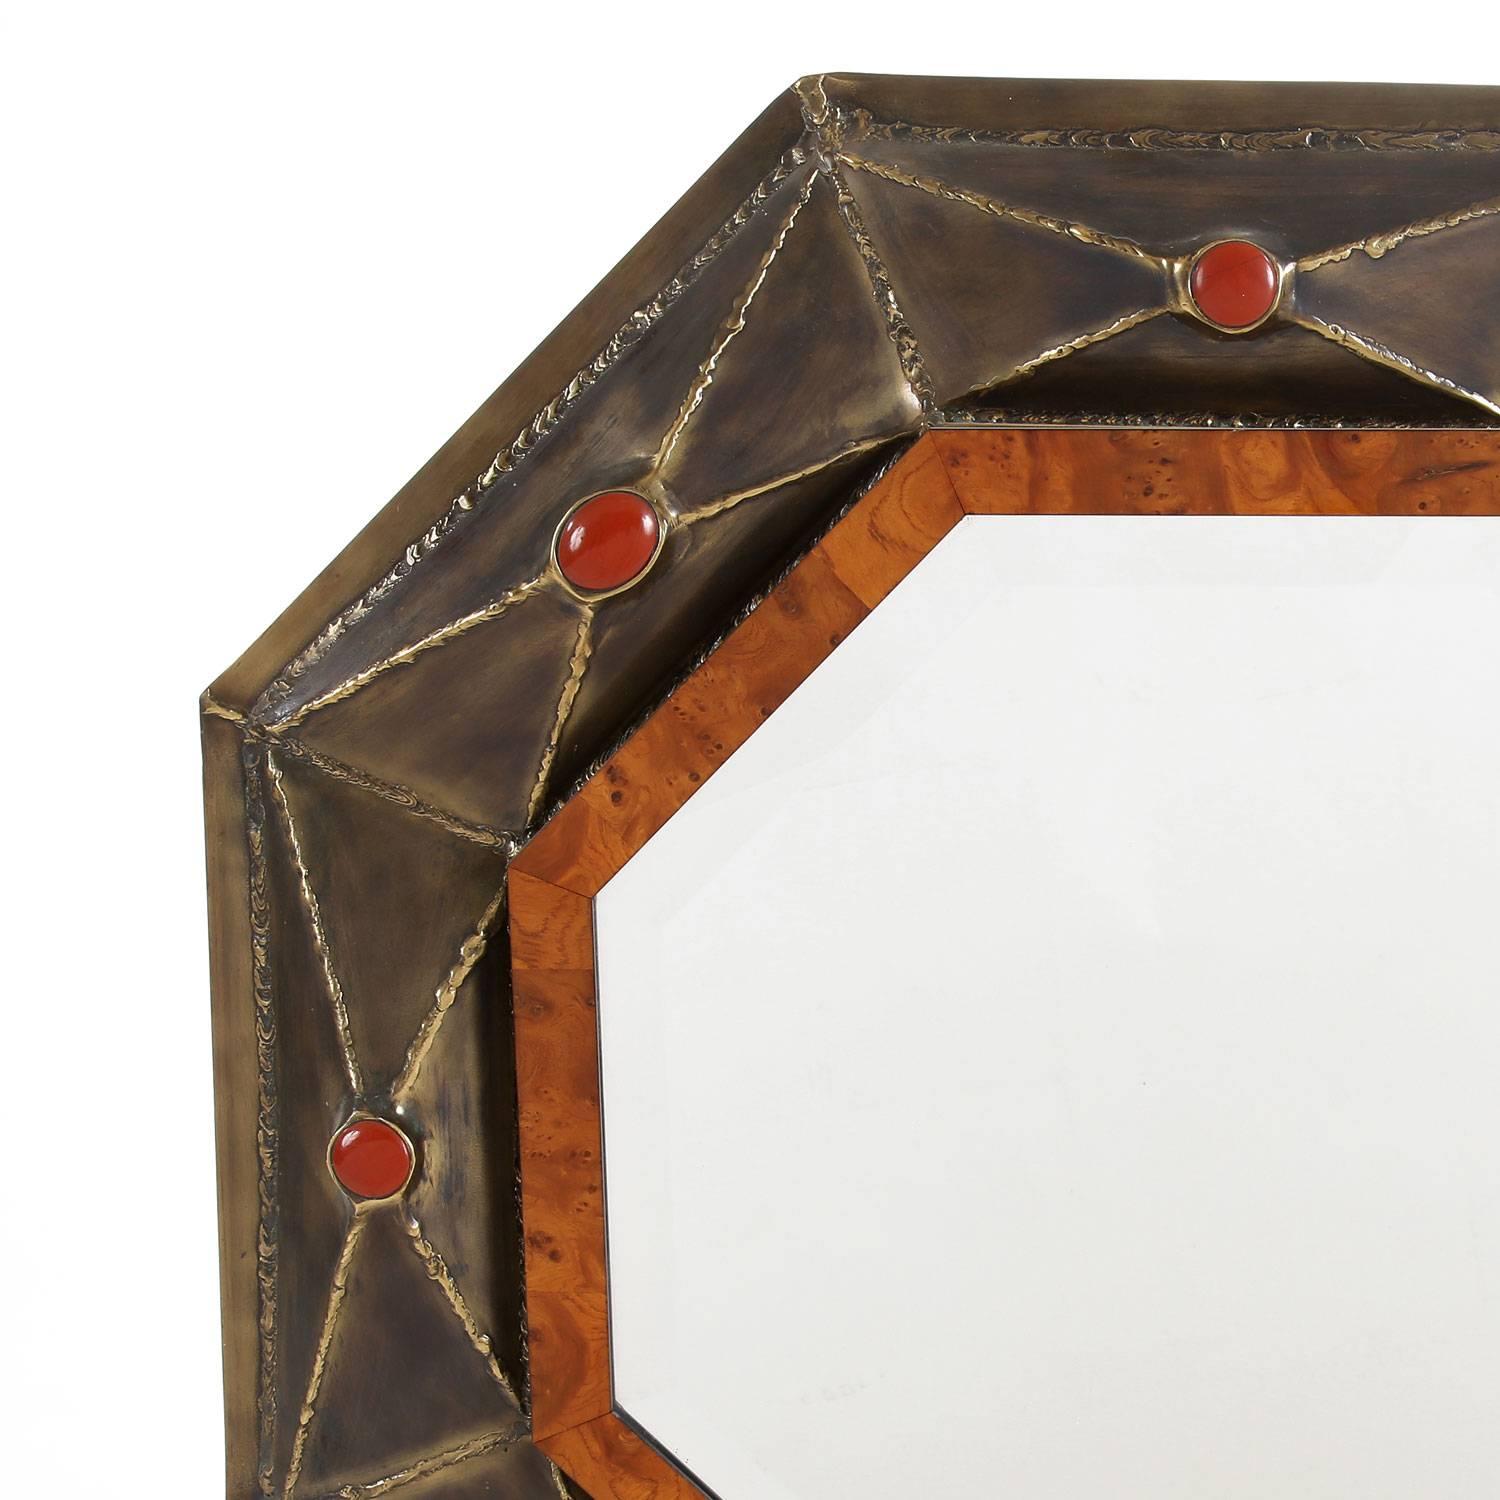 Beveled corners mirror by Jacques Duval-Brasseur (born in 1934),
circa 1970.
Patinated brass and bronze, wood veneer and cabochons,
signed.
Measures: 77 x 79 cm.